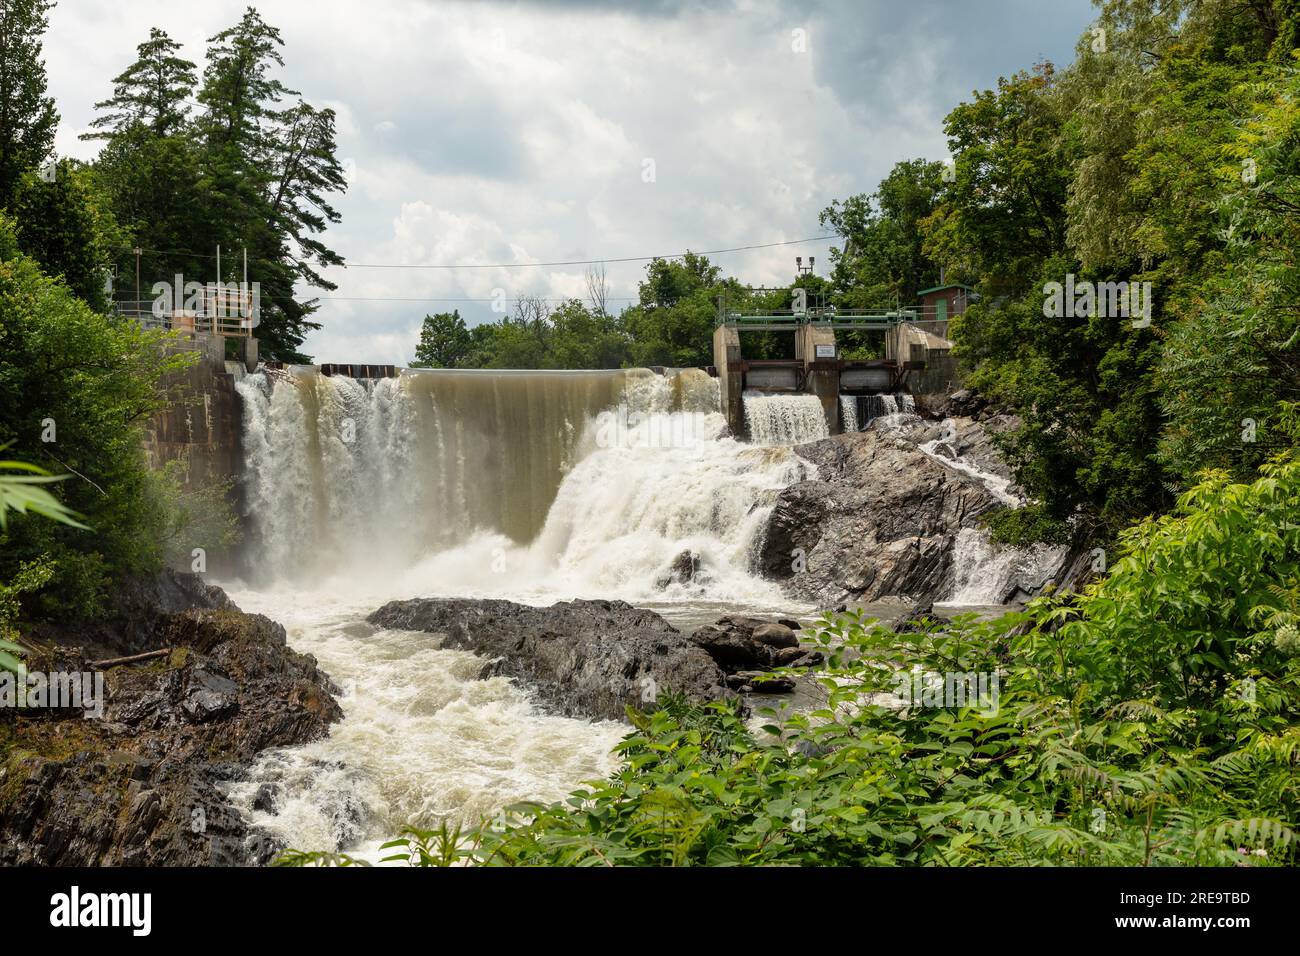 The Waits River Falls are seen in the quaint town of Bradford, Vermont. The waterfall is formed by a dam along the Waits River, a tributary of the Con Stock Photo